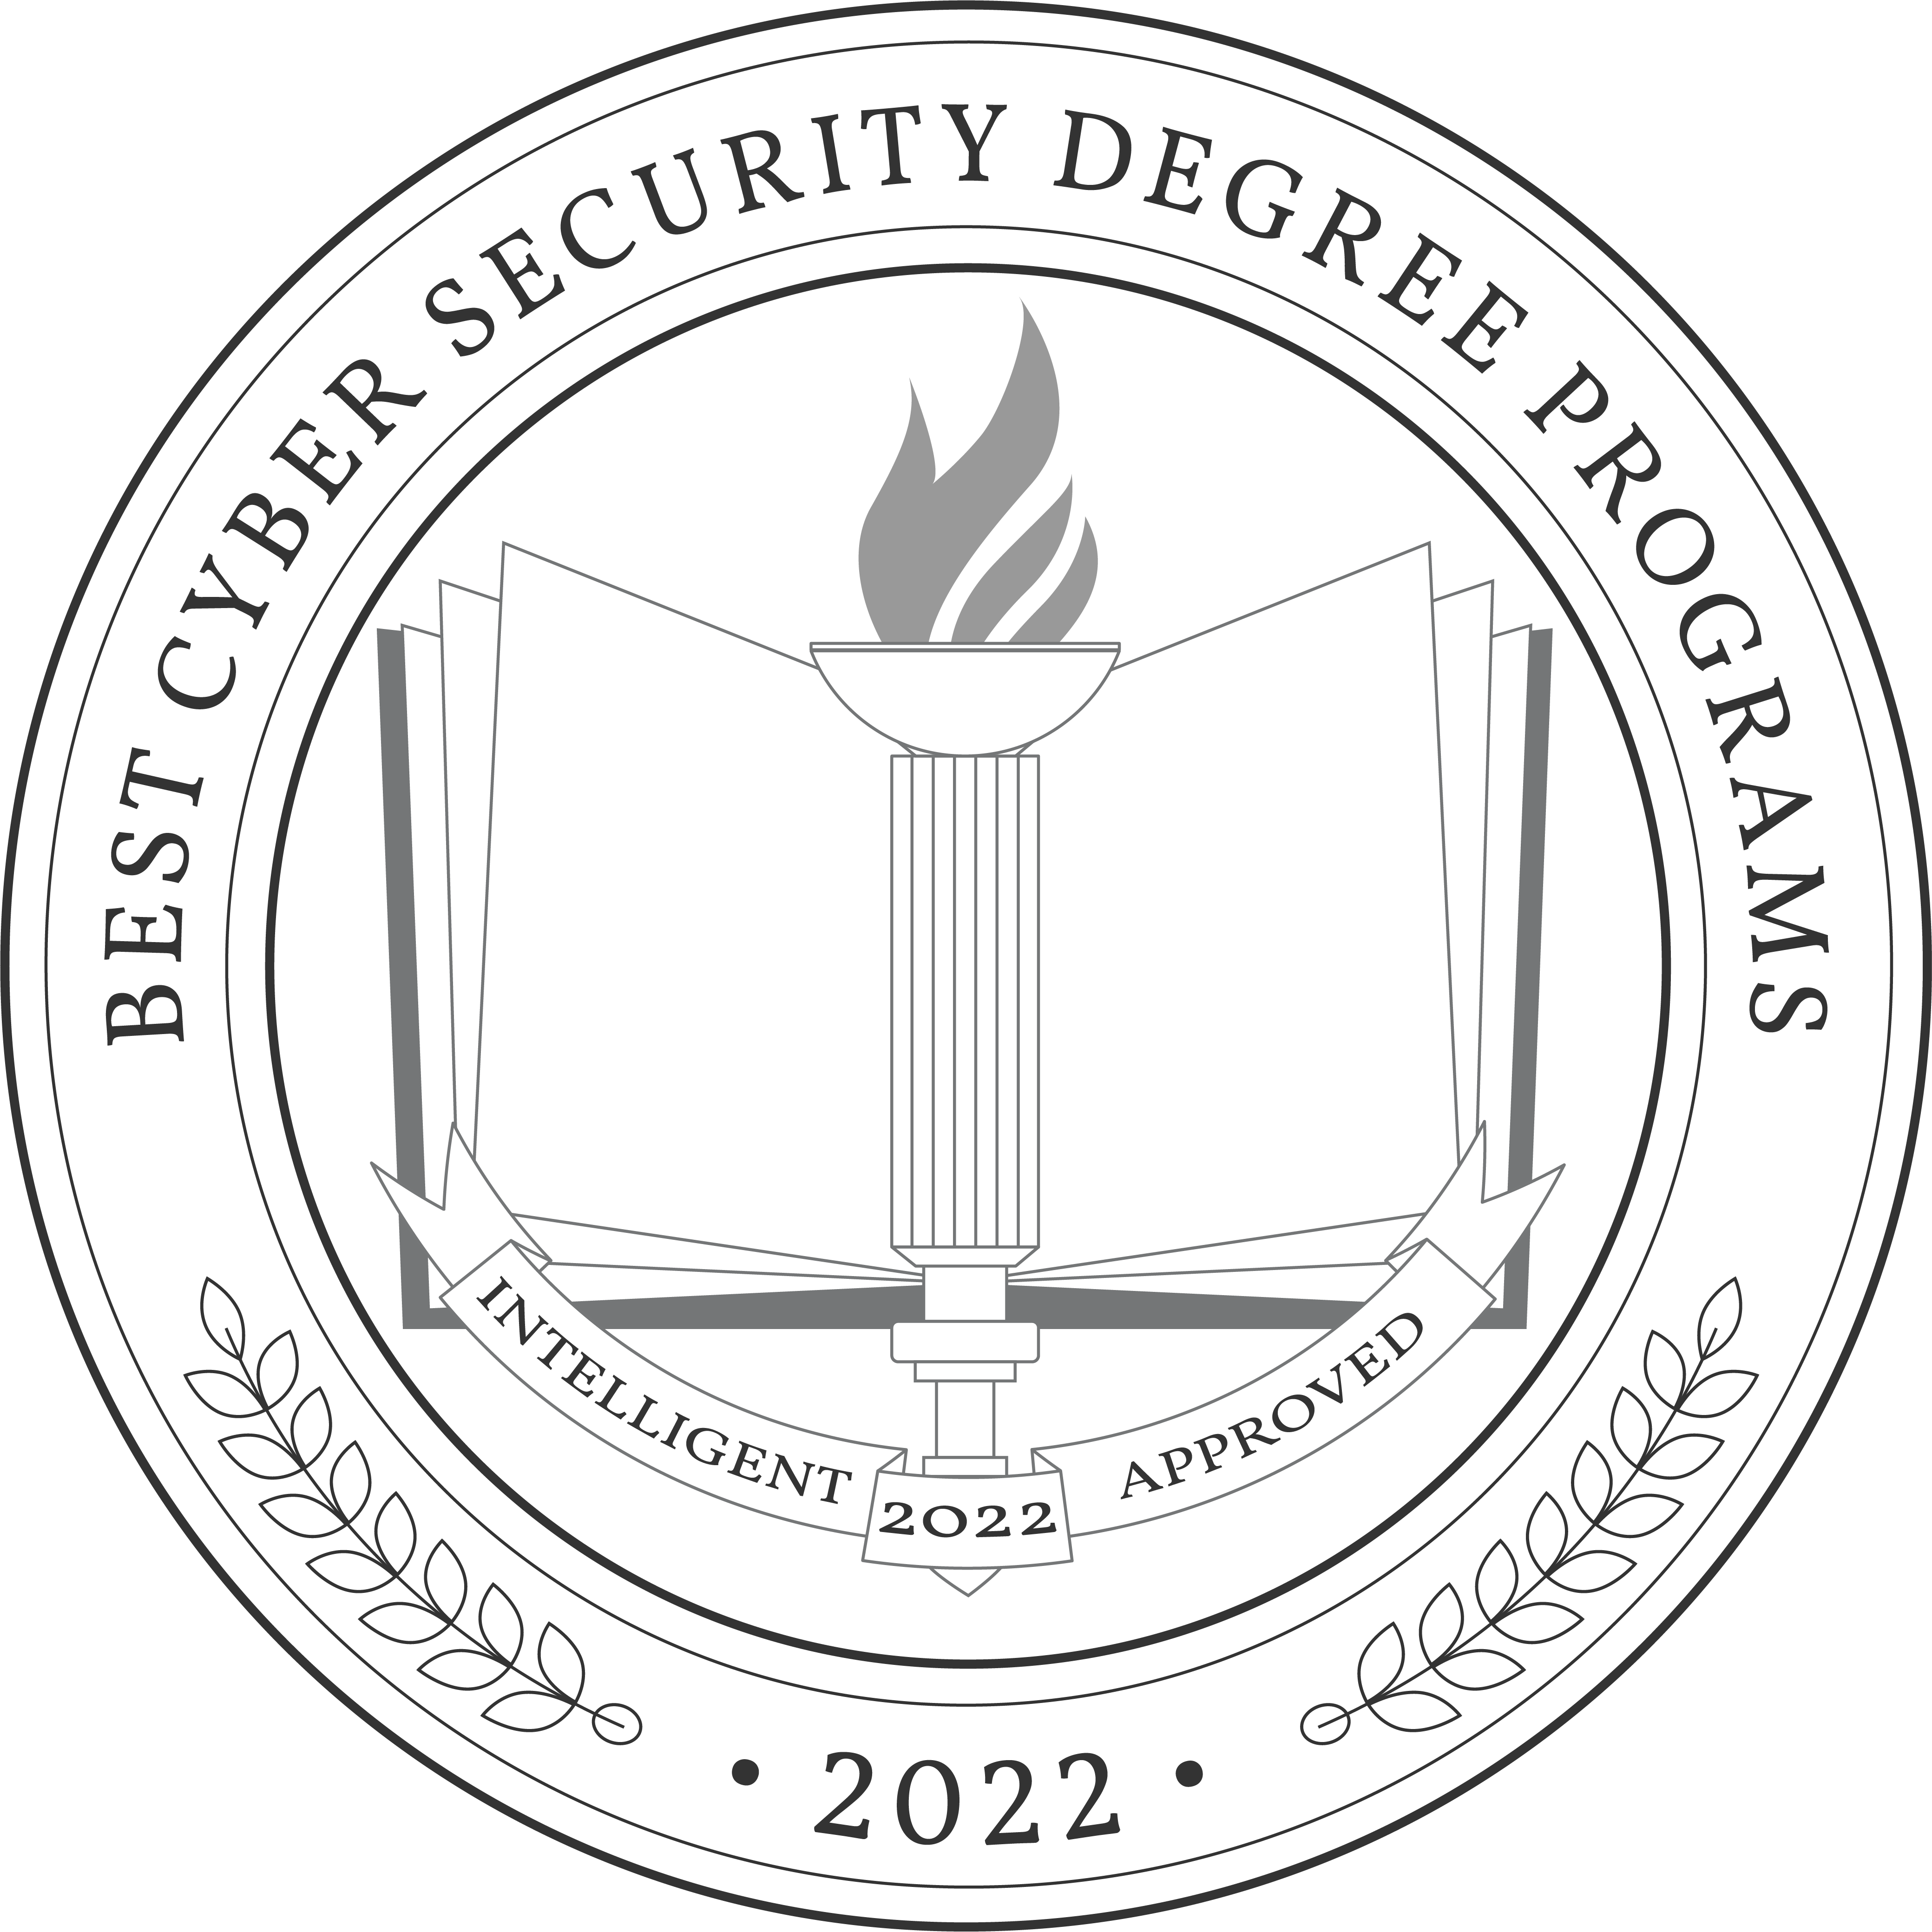 Best-Cyber-Security-Degree-Programs-Badge-1.png